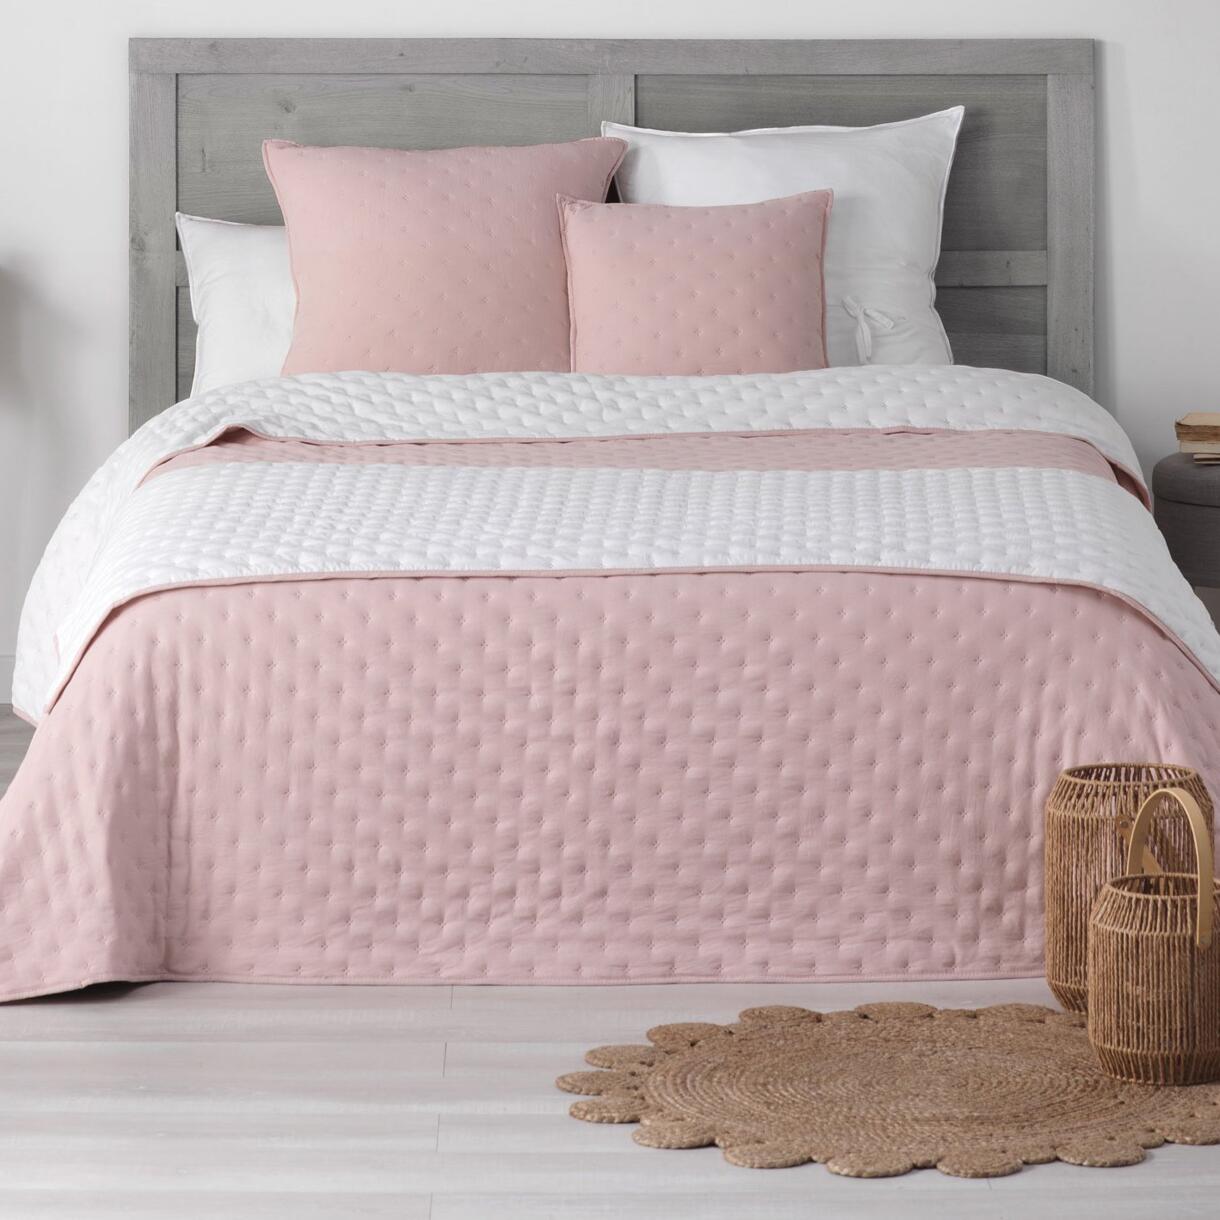 Runner letto velluto (180 cm) Mellow Chic Rosa 1